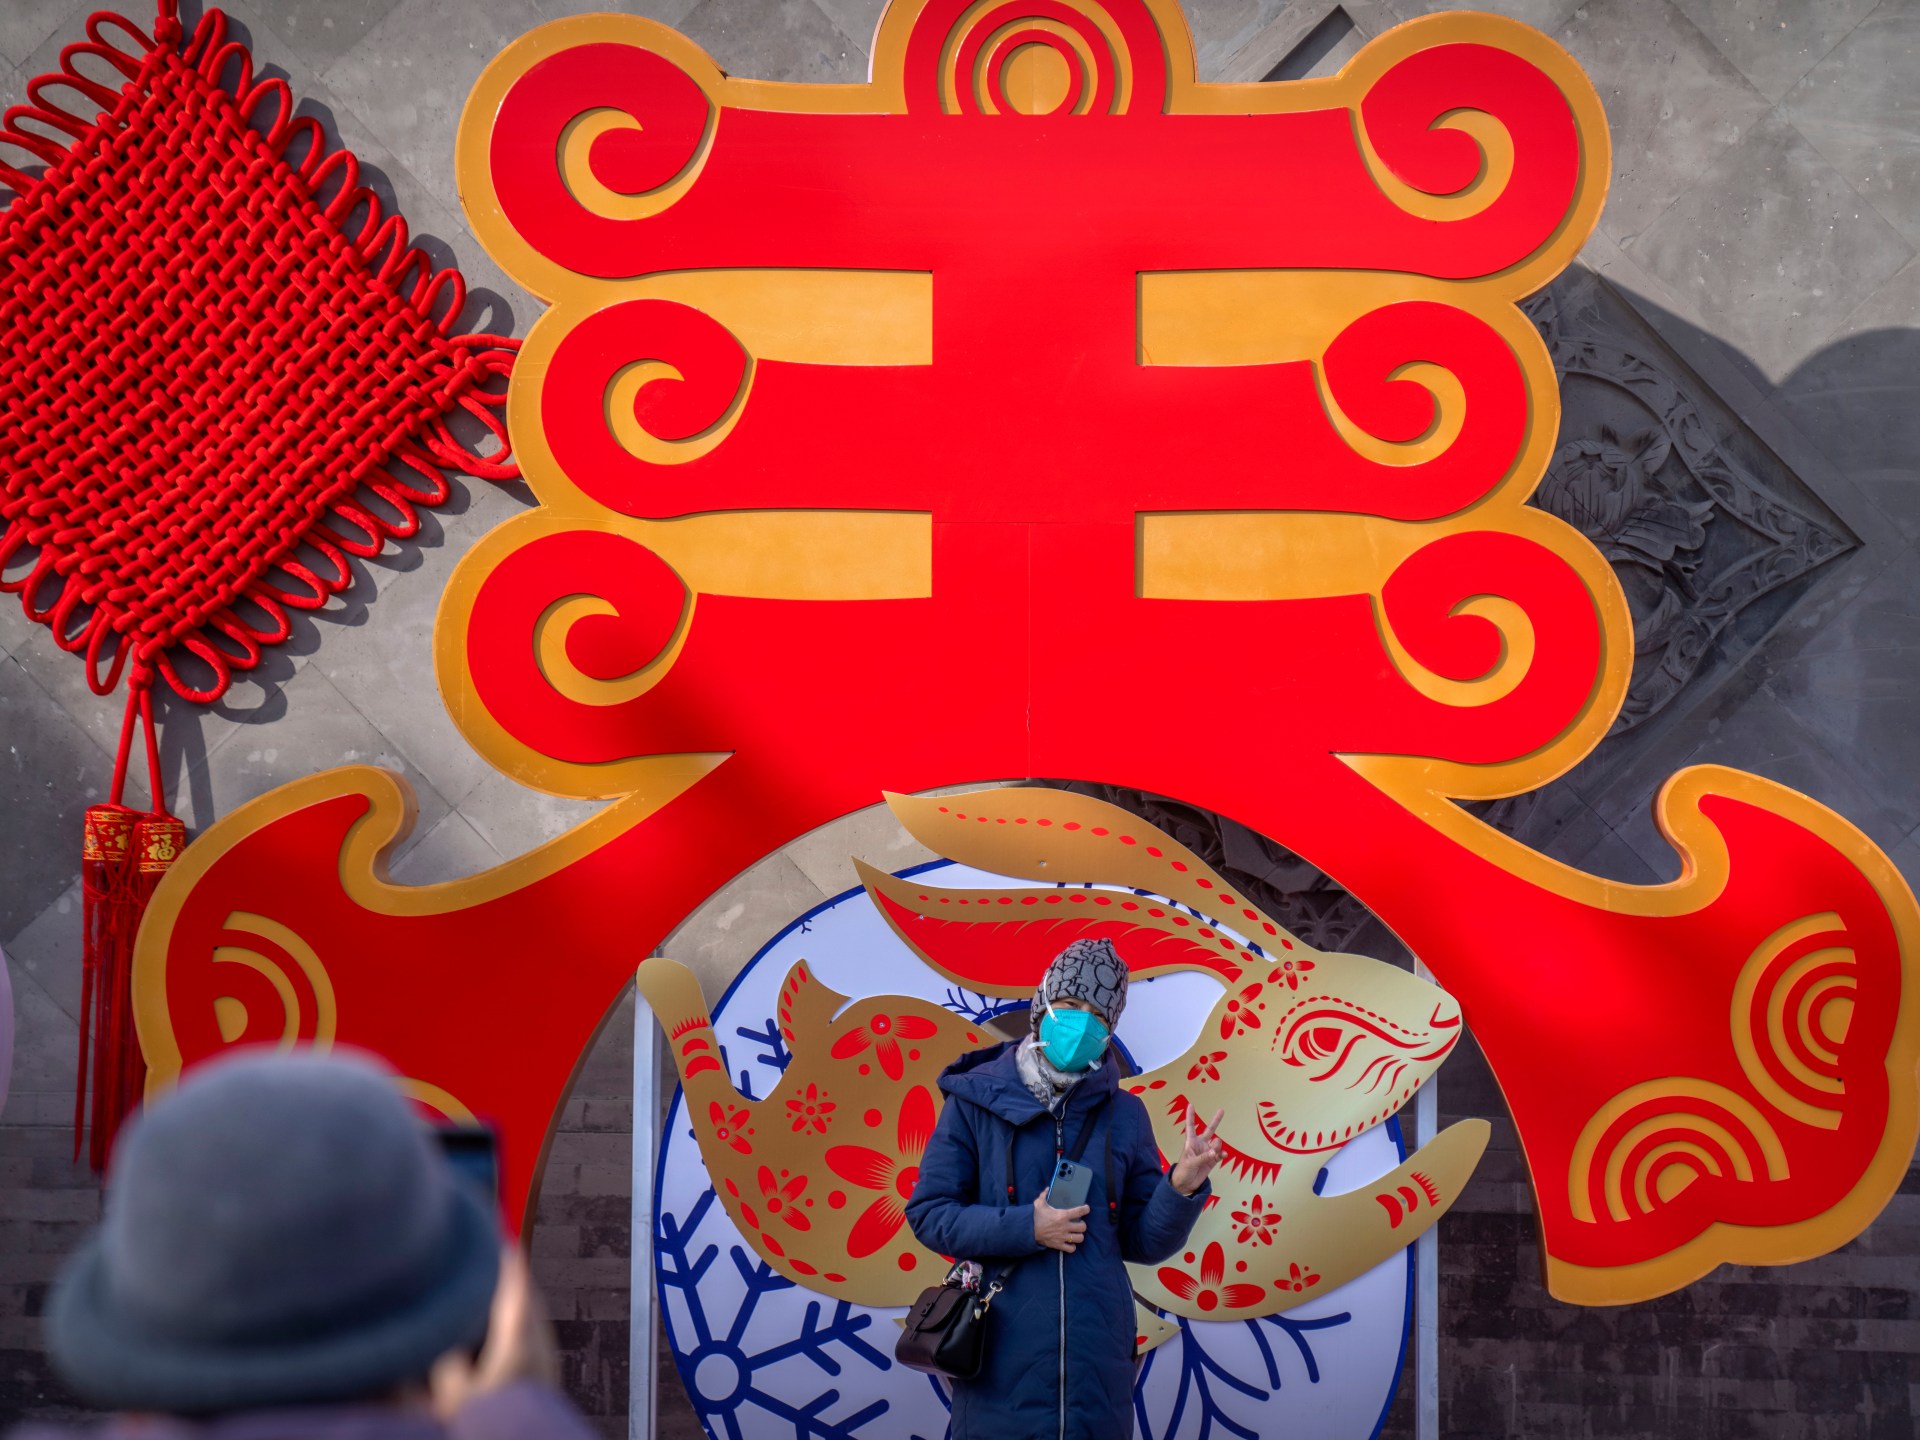 China rings in Lunar New Year with most COVID rules lifted